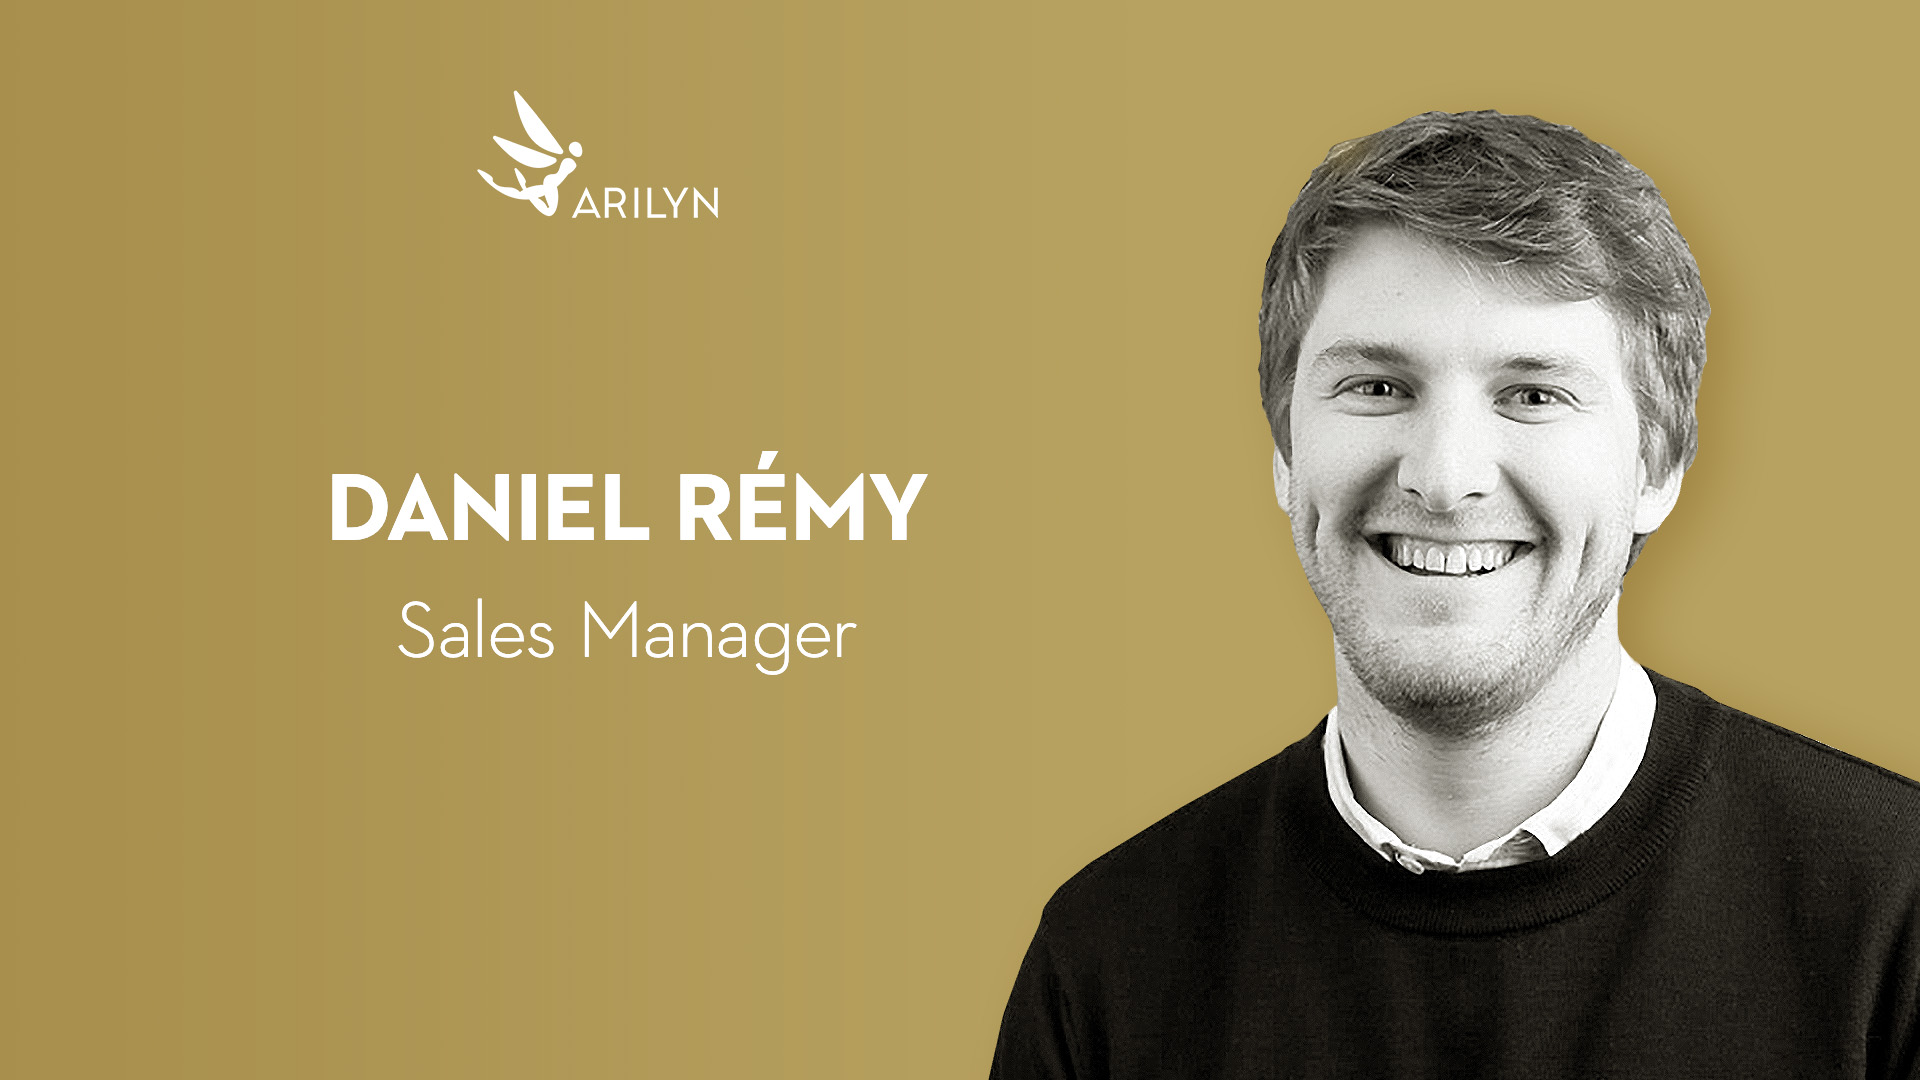 Get to know Arilyn – Daniel Rémy, Sales Manager